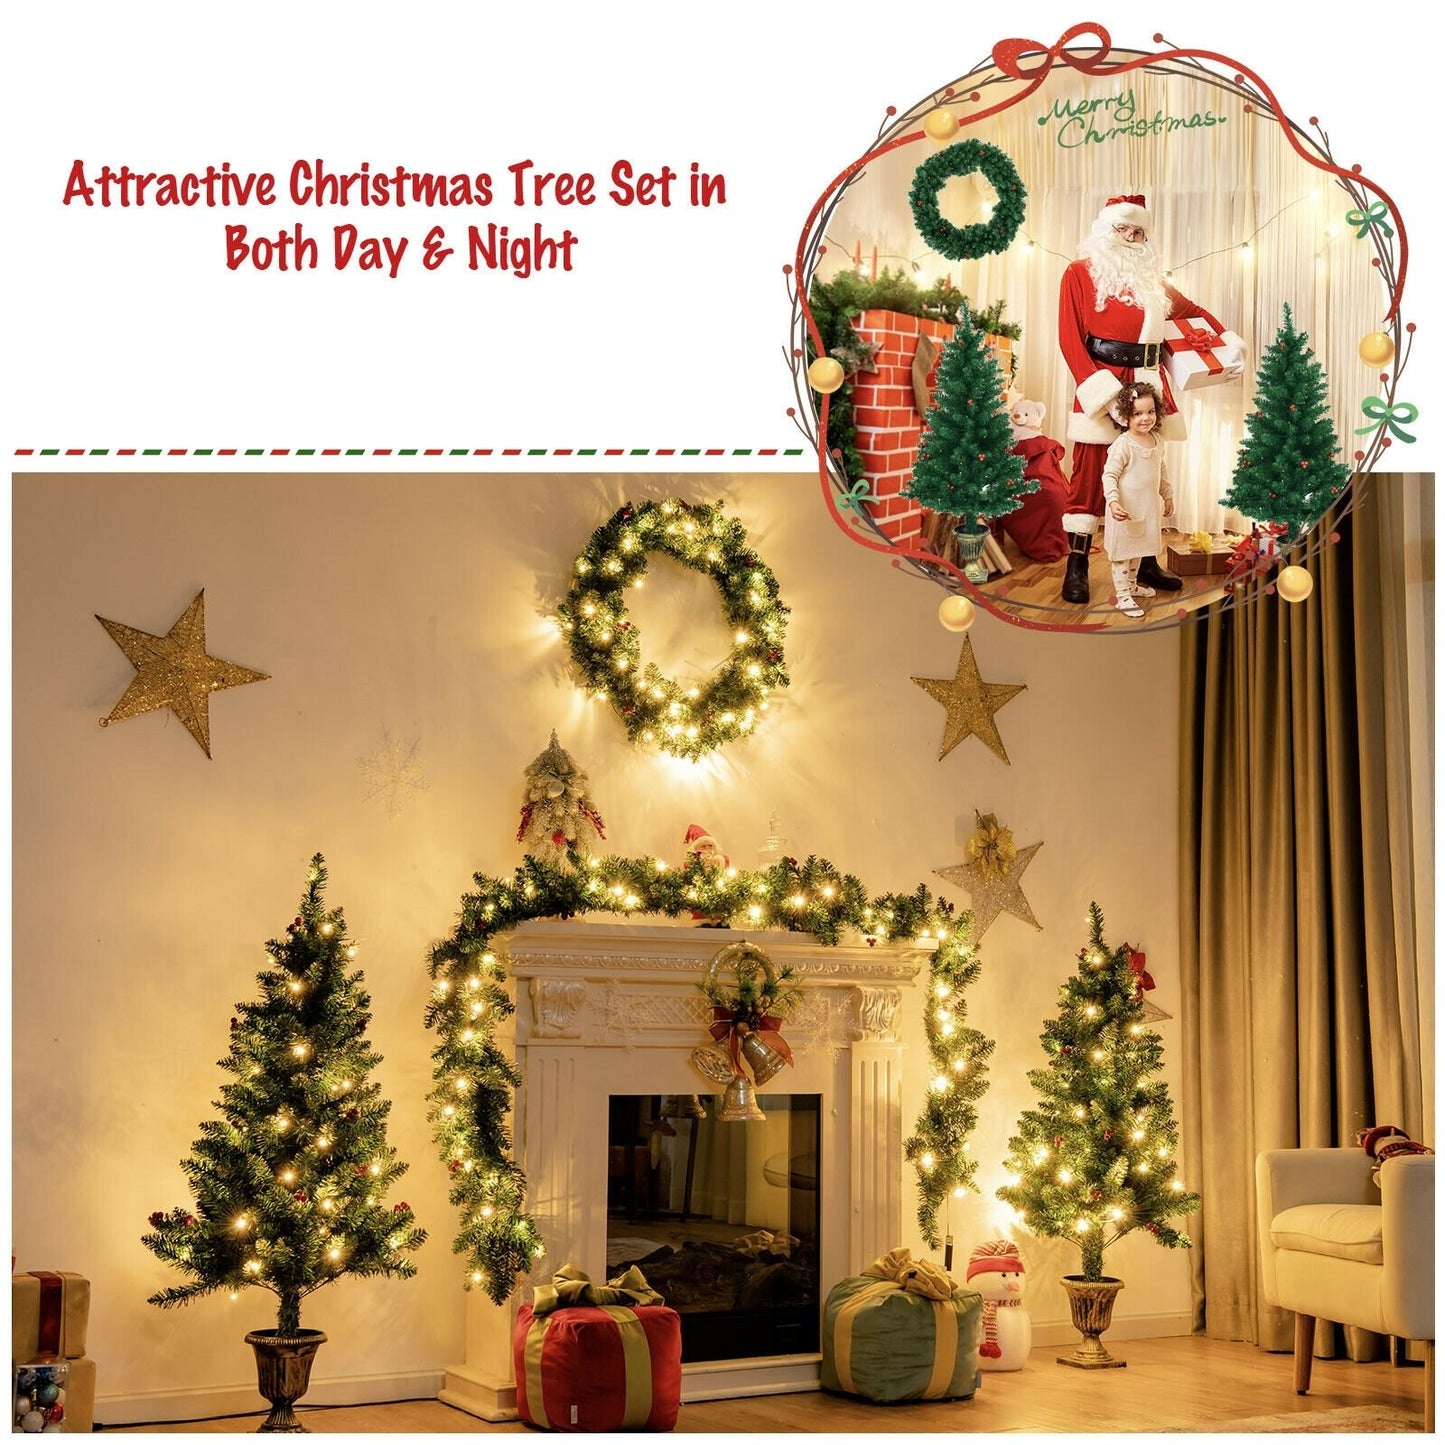 4 Pieces Christmas Decoration Set with Garland Wreath and Entrance Trees, Green - Gallery Canada